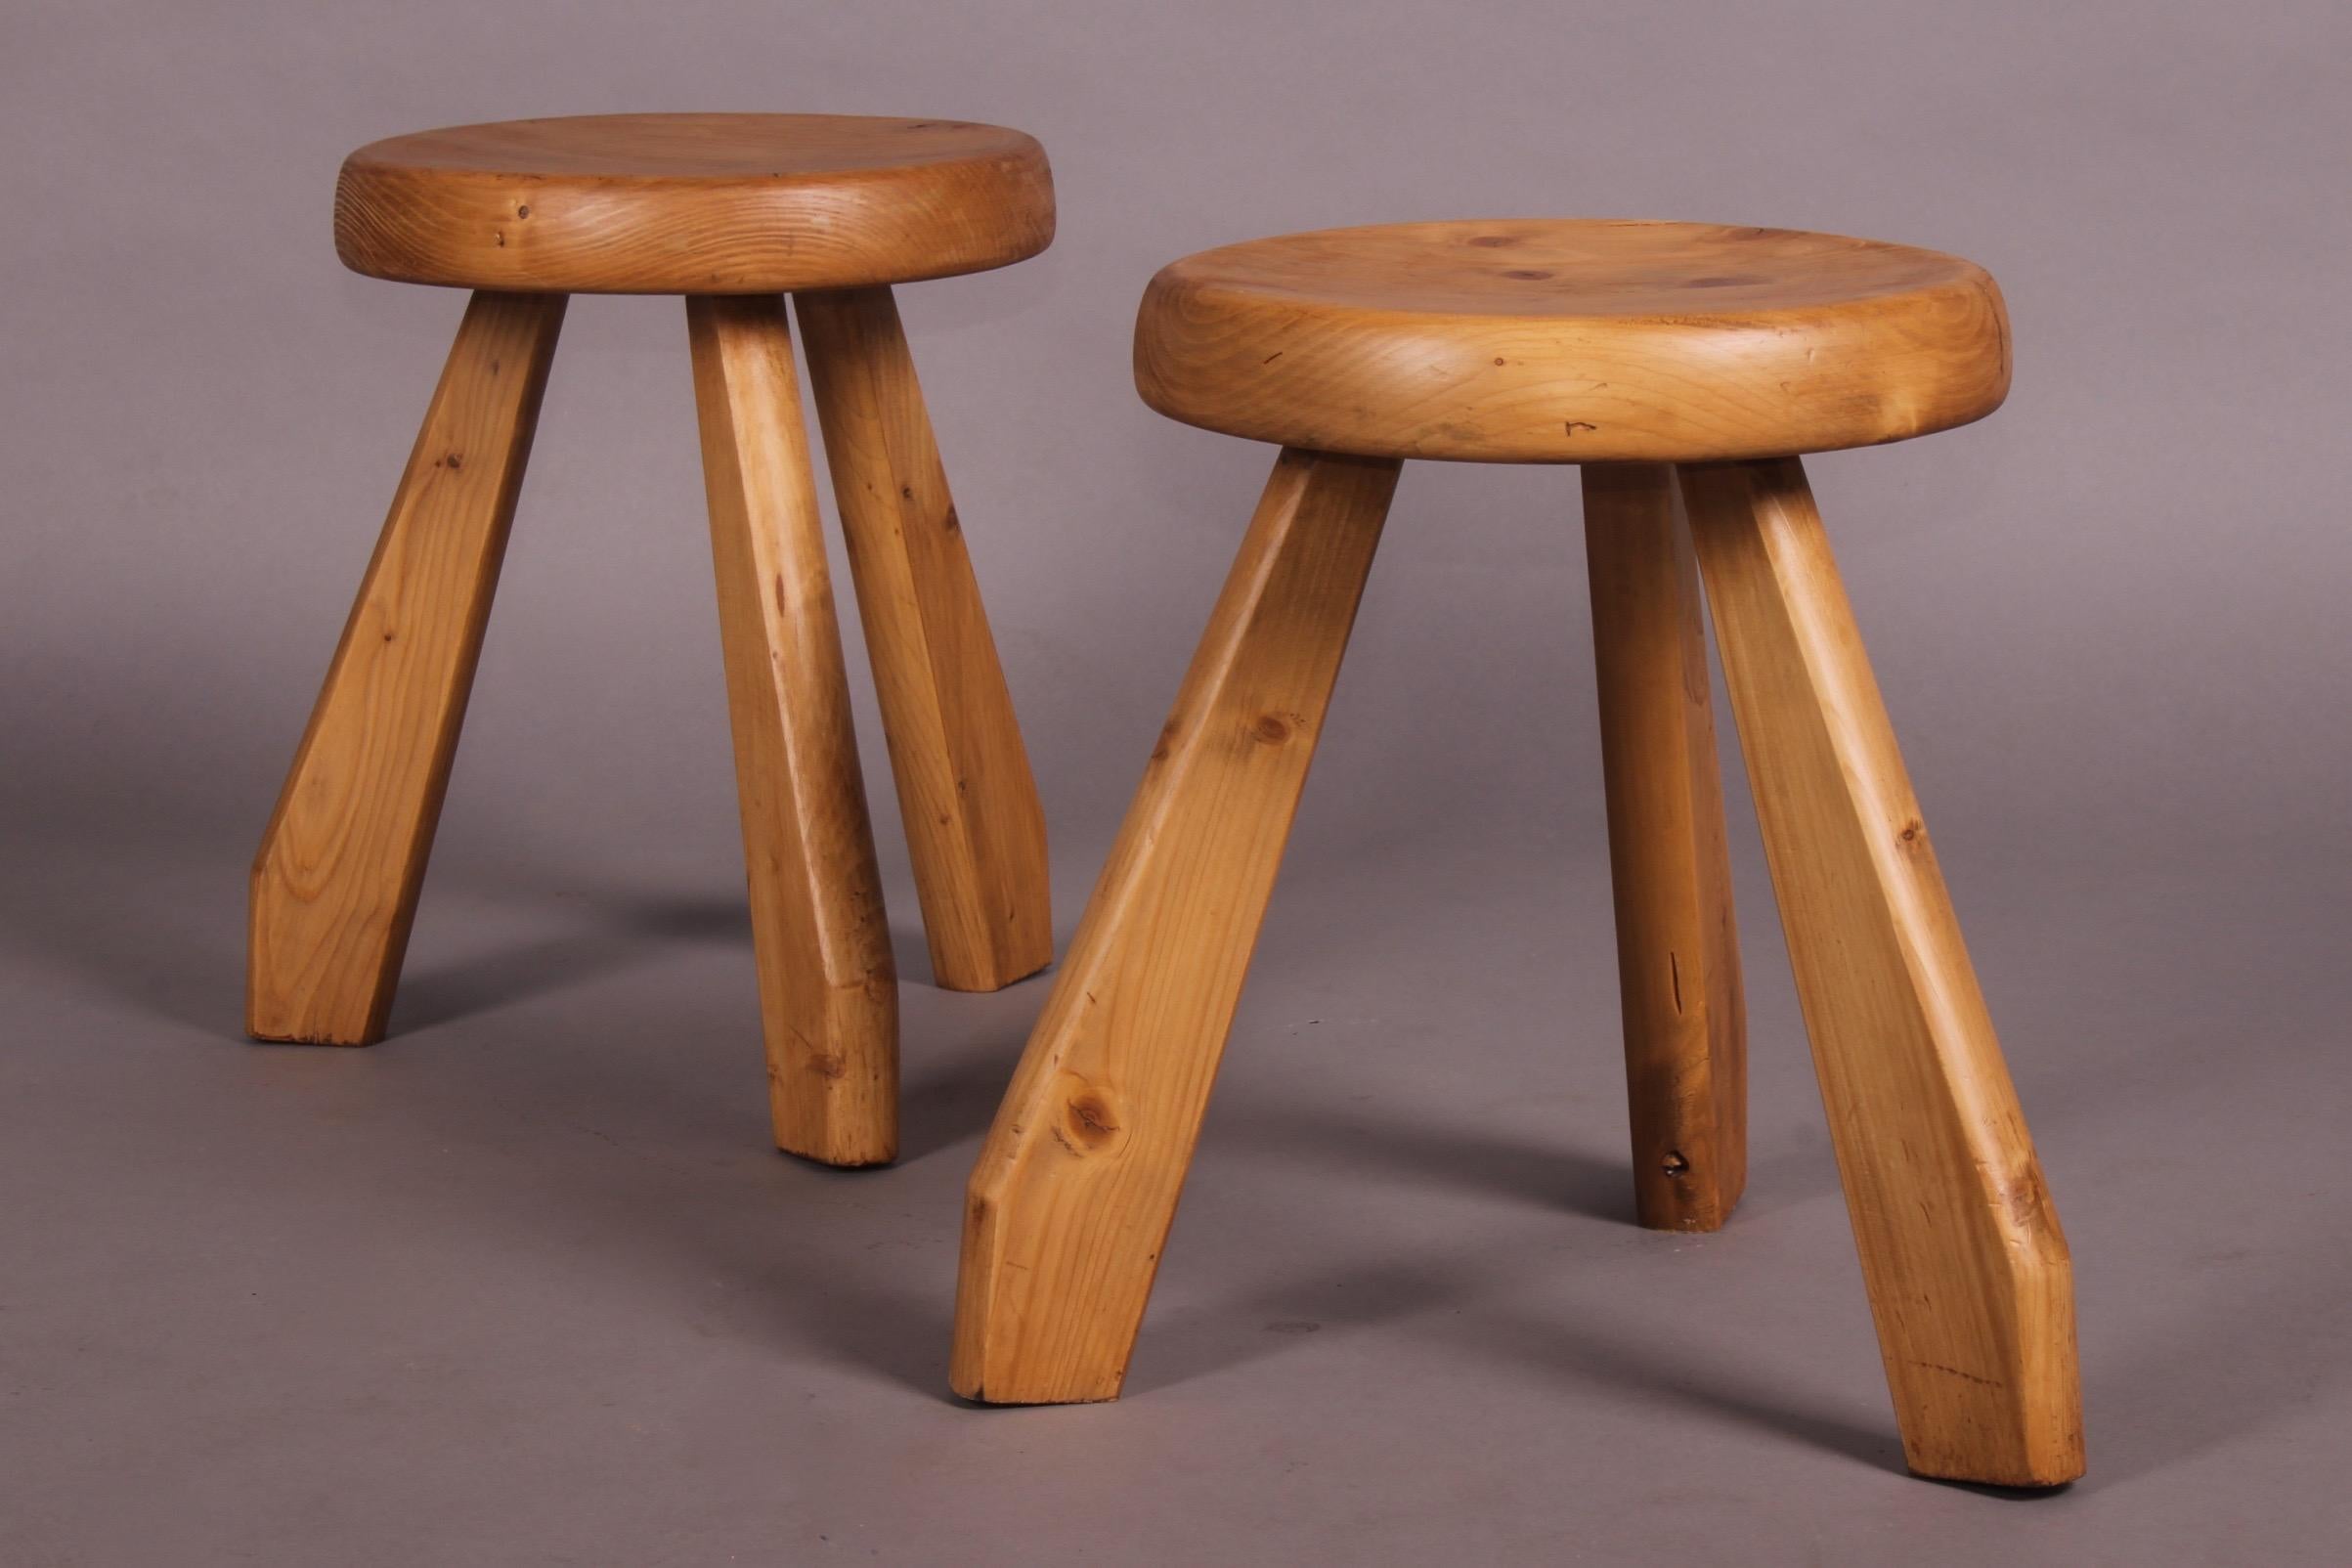 A pair of pine stools by Charlotte Perriand with a thick, round seat. The wood has a beautiful natural aged patina. The 'Sandoz' stool was originally designed, circa 1955, and was used in Perriand’s own chalet in Me´ribel. In 1962 she used the model